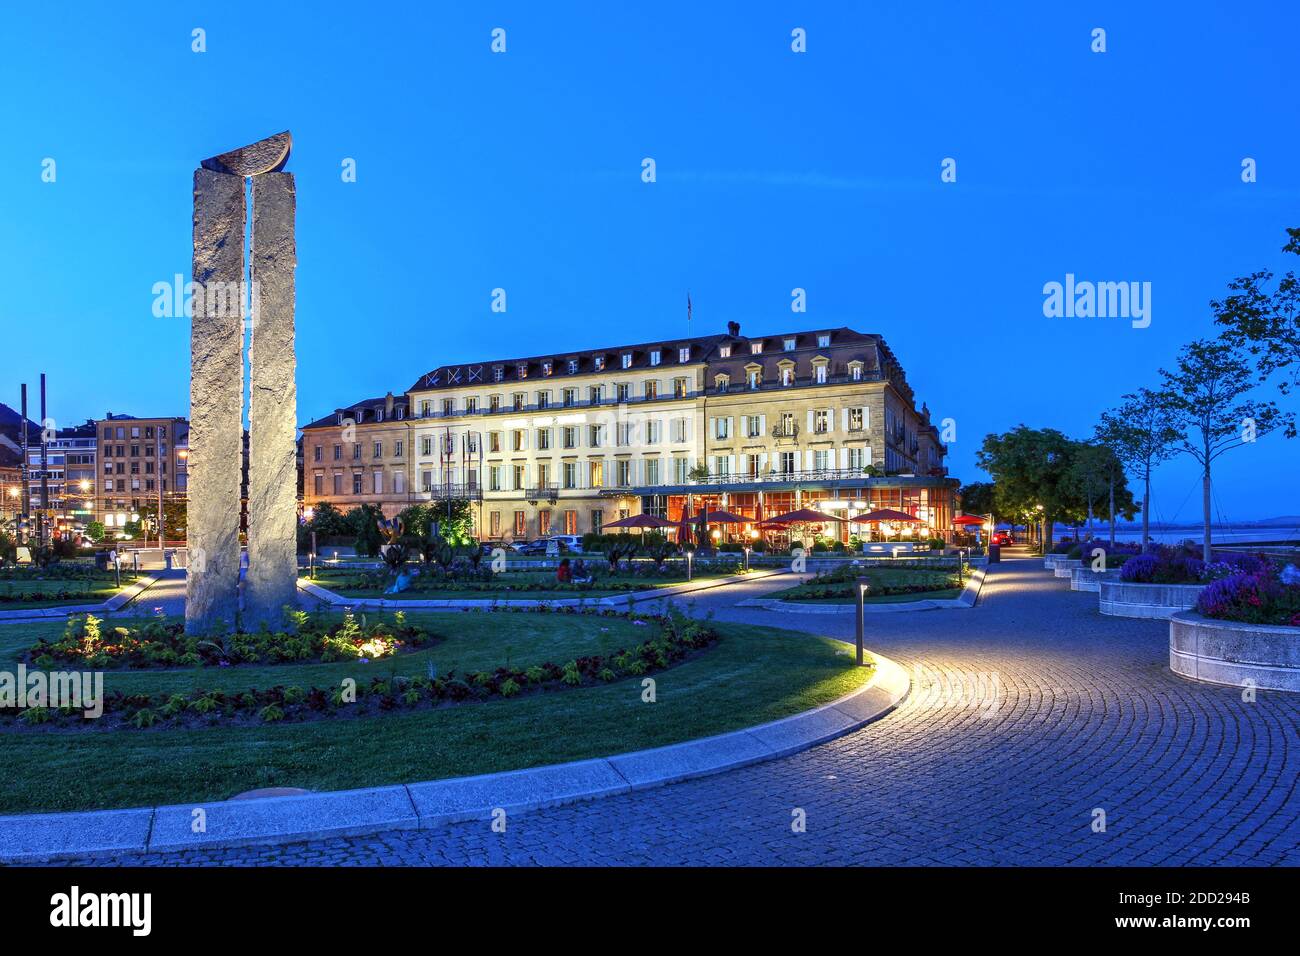 Sunset on Esplanade de Mont Blanc in Neuchatel, Switzerland featuring an artwork by the Swiss artist Rene Kueng and historic Hotel Beau-Rivage. Stock Photo